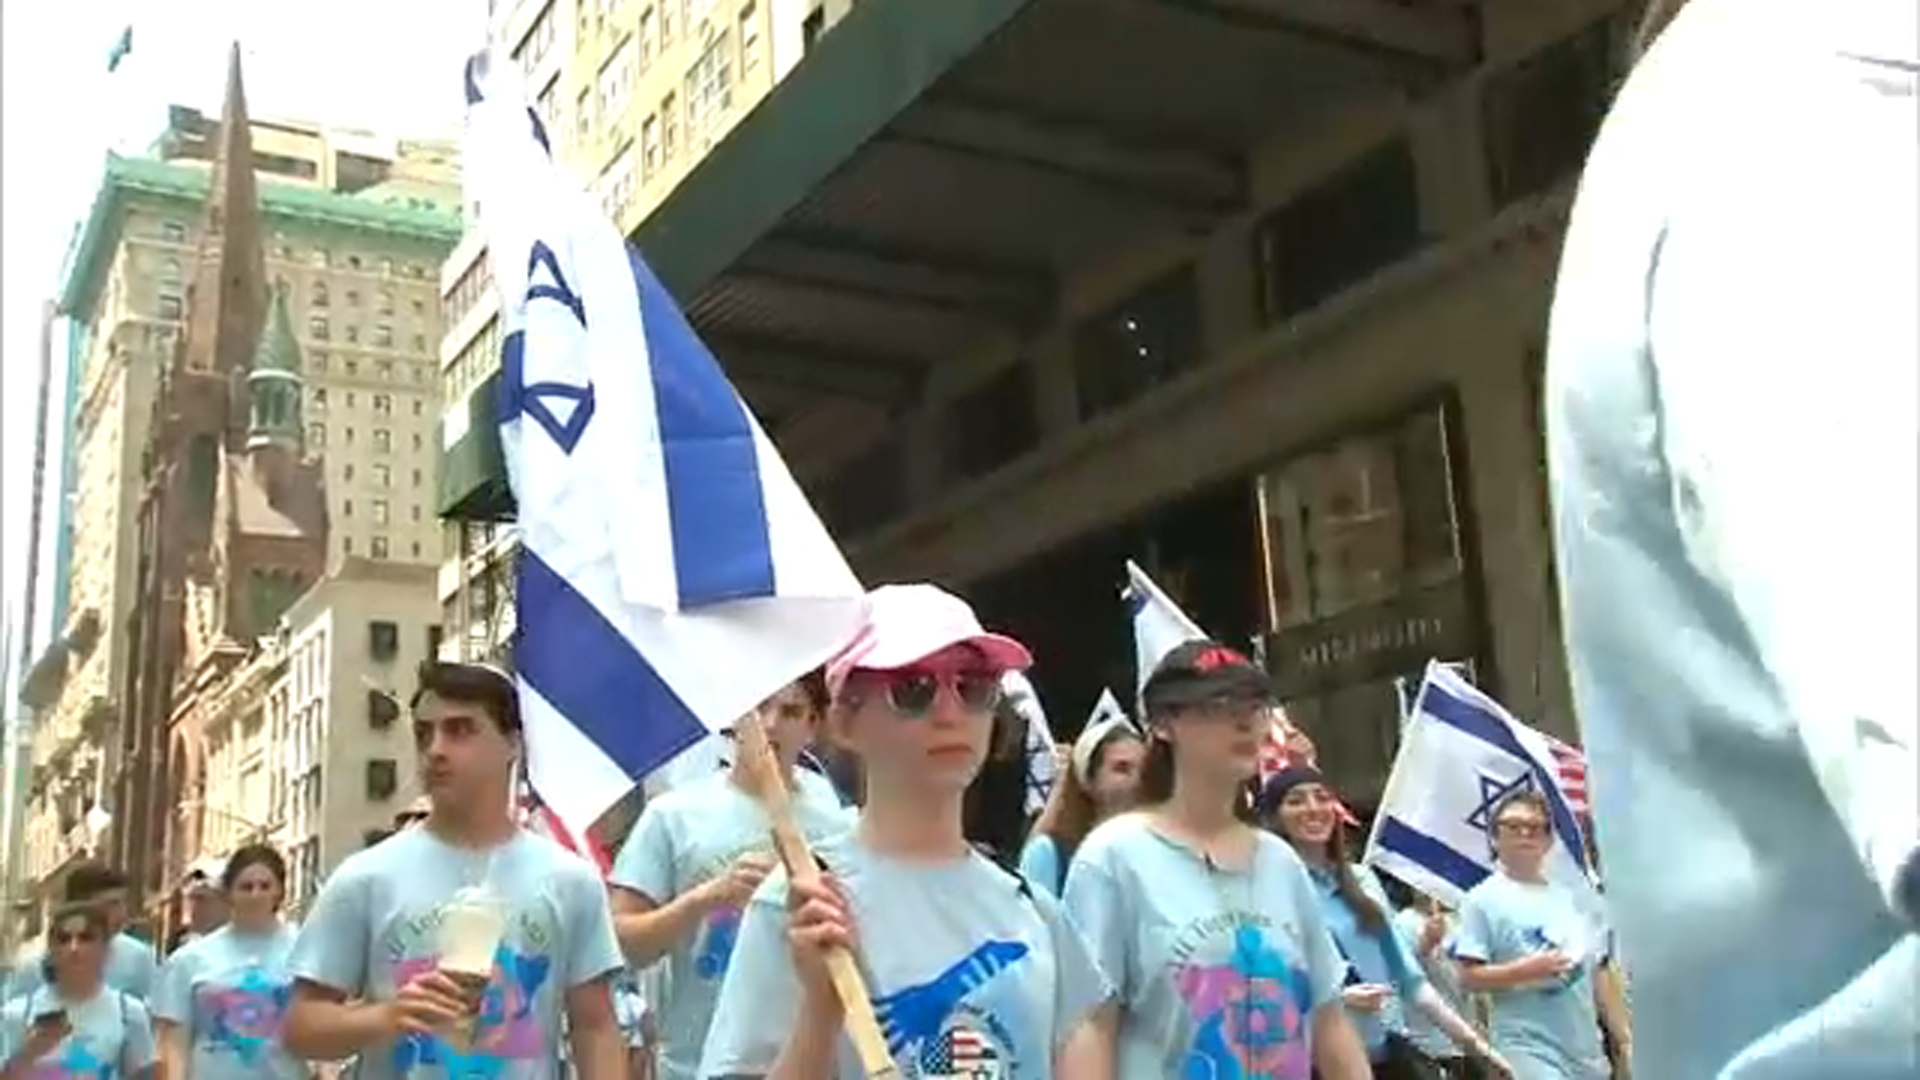 Celebrate Israel Parade kicks off in NYC, expected to be met with protest against PM Netanyahu￼